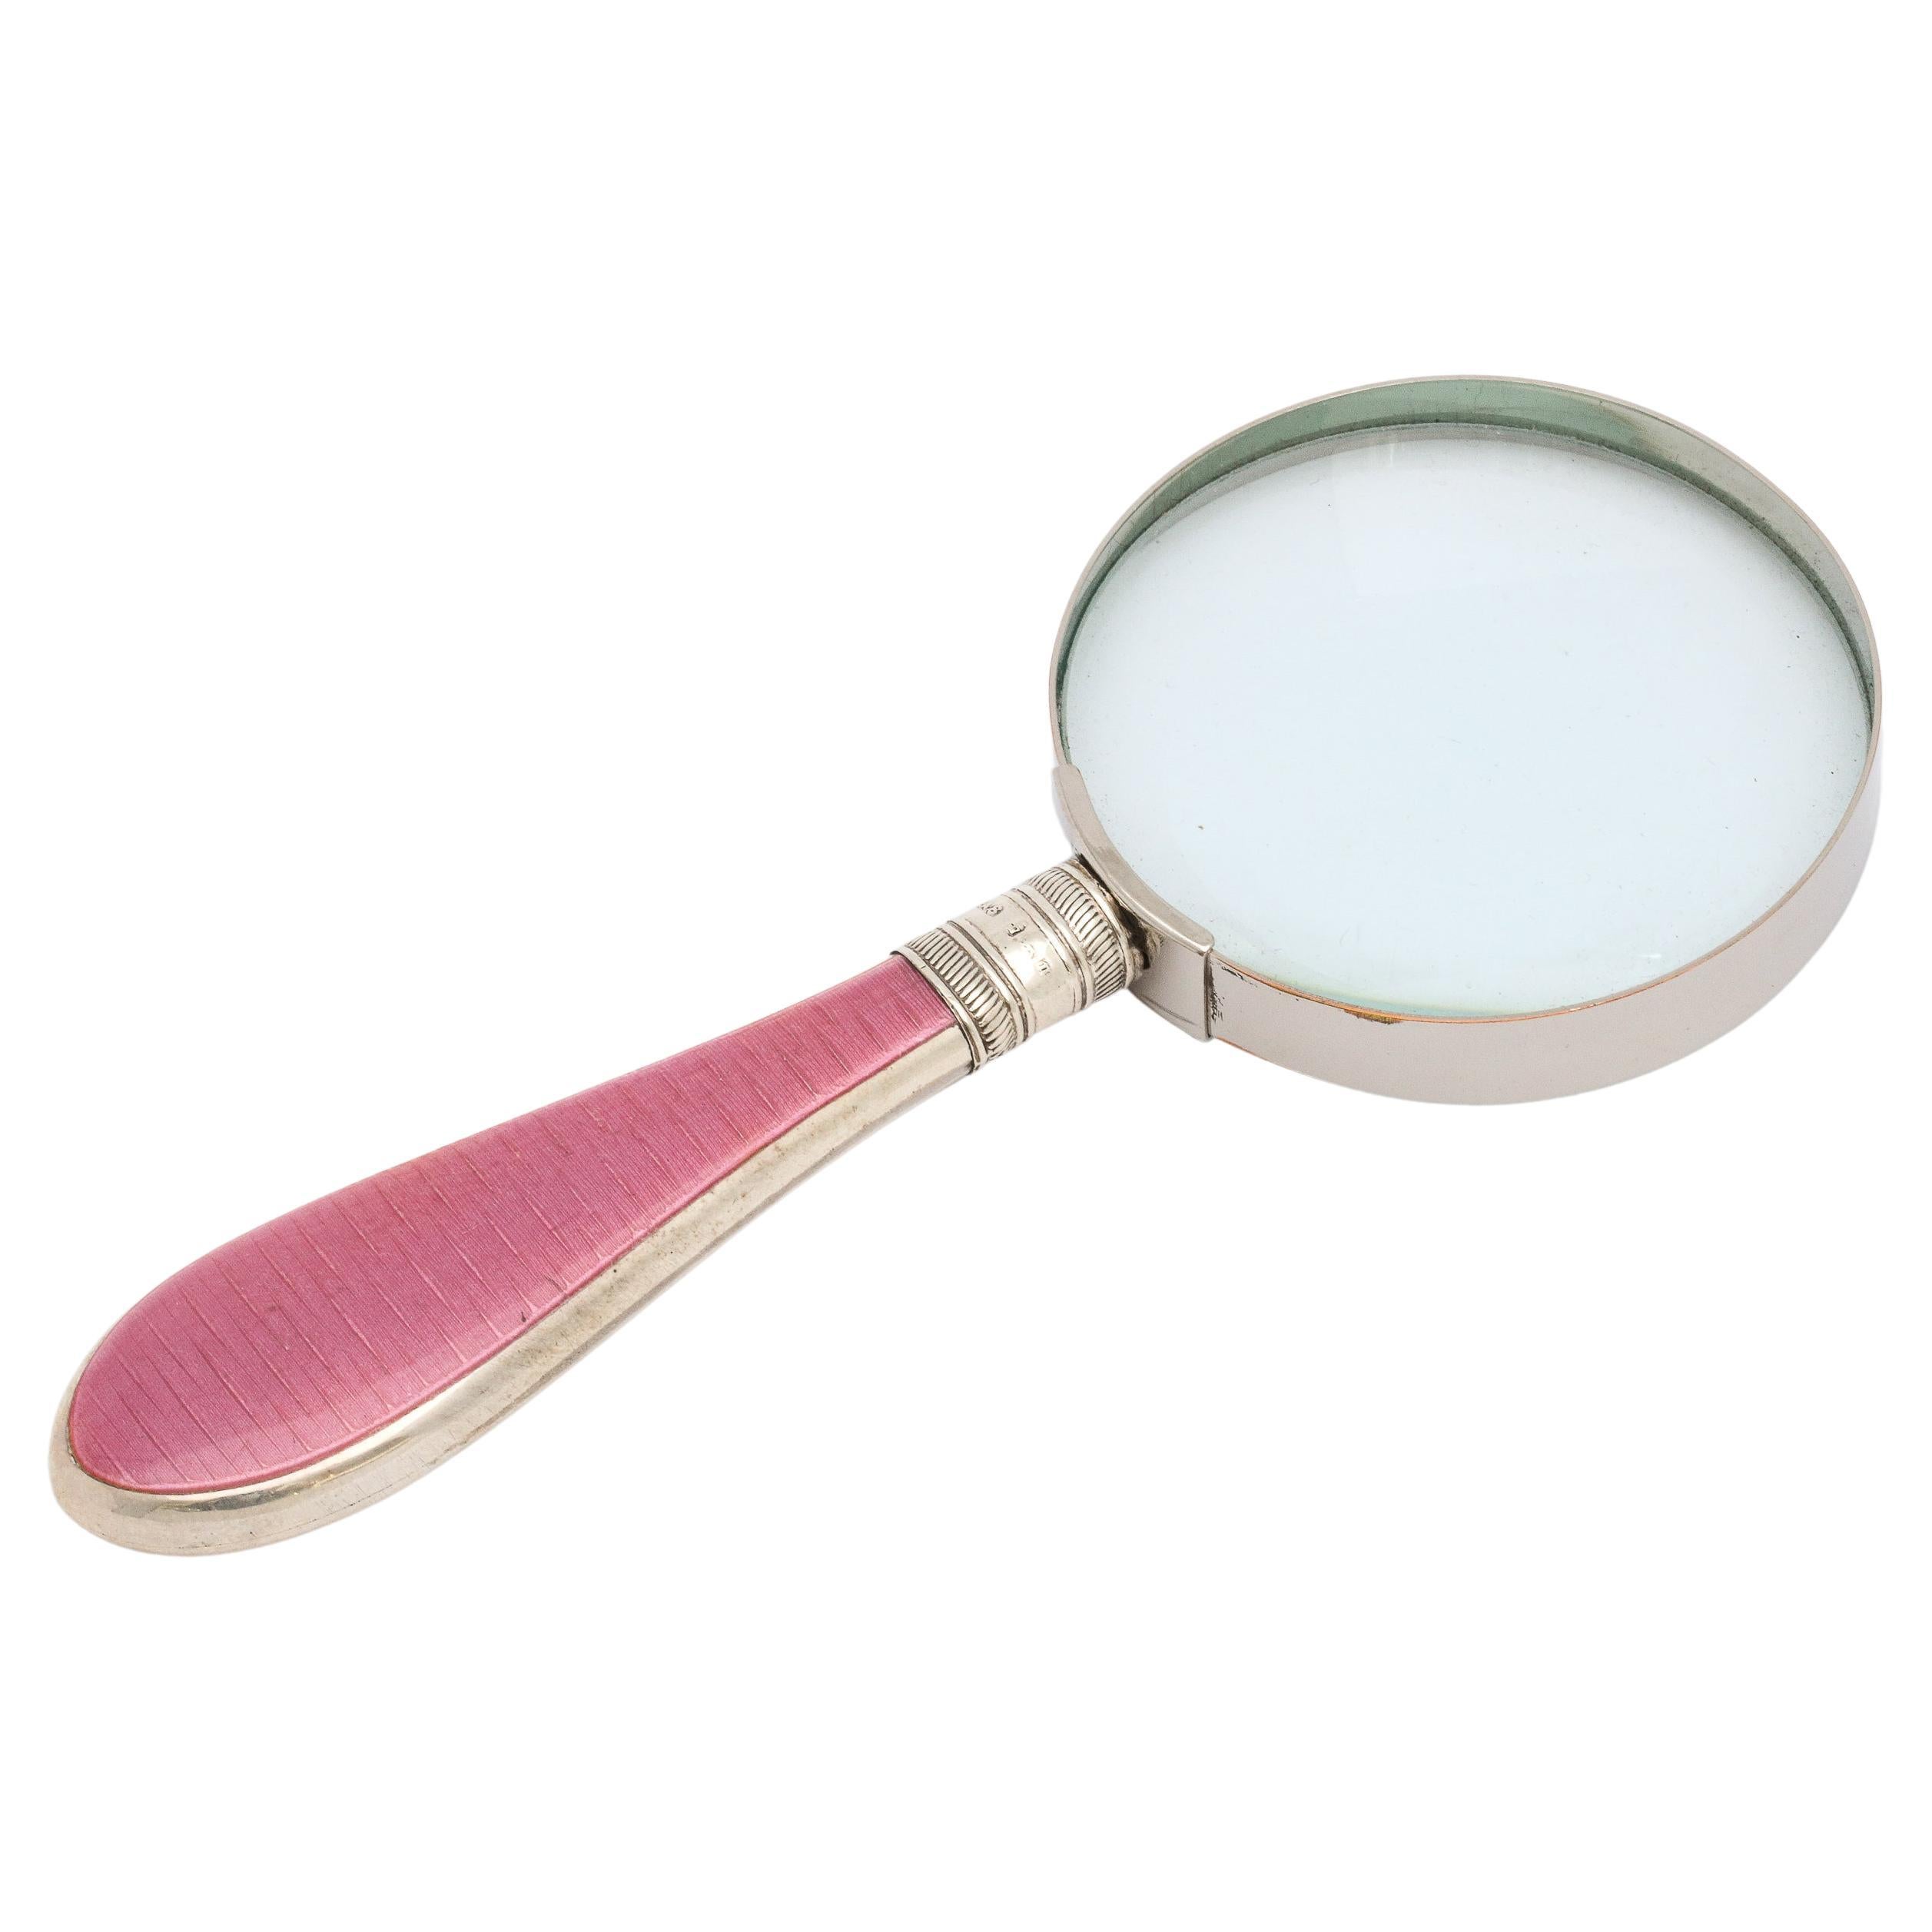 What are magnifying glasses called?